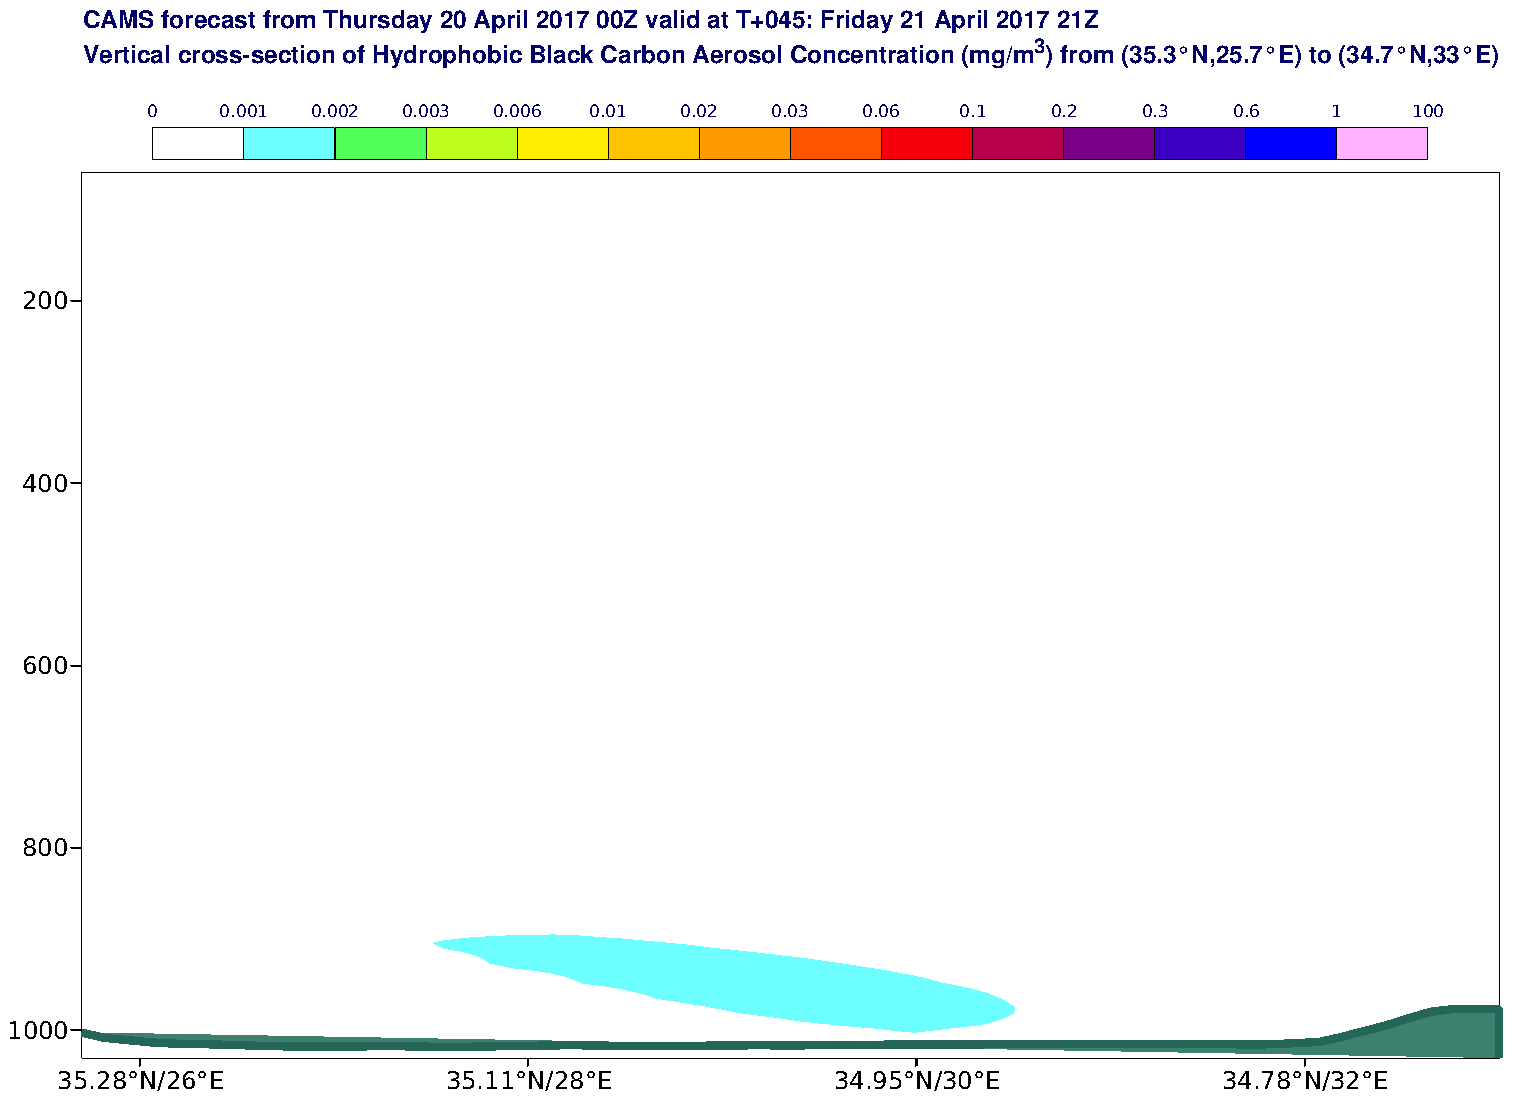 Vertical cross-section of Hydrophobic Black Carbon Aerosol Concentration (mg/m3) valid at T45 - 2017-04-21 21:00